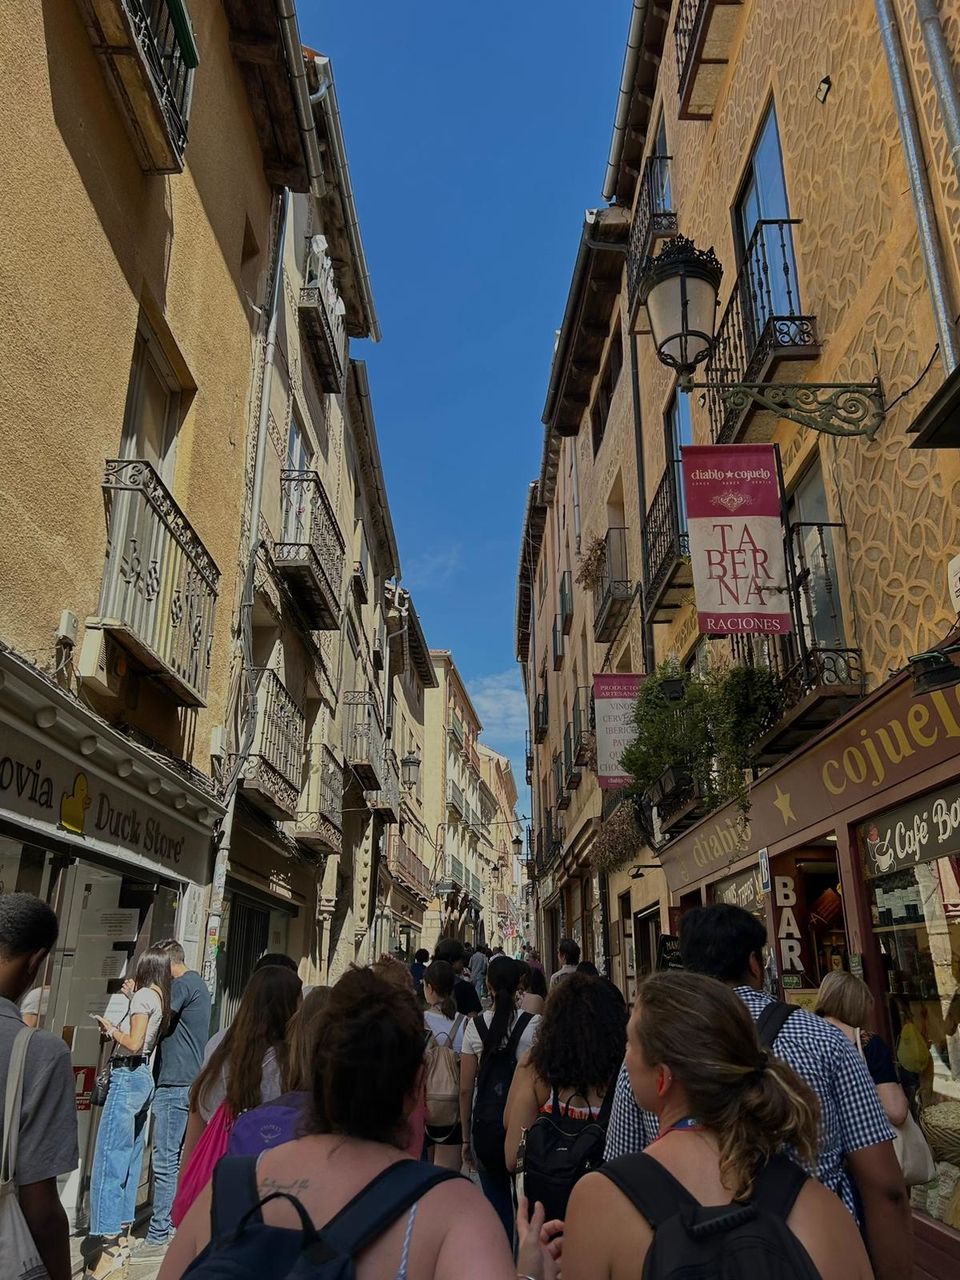 Students walking through the streets of Segovia.